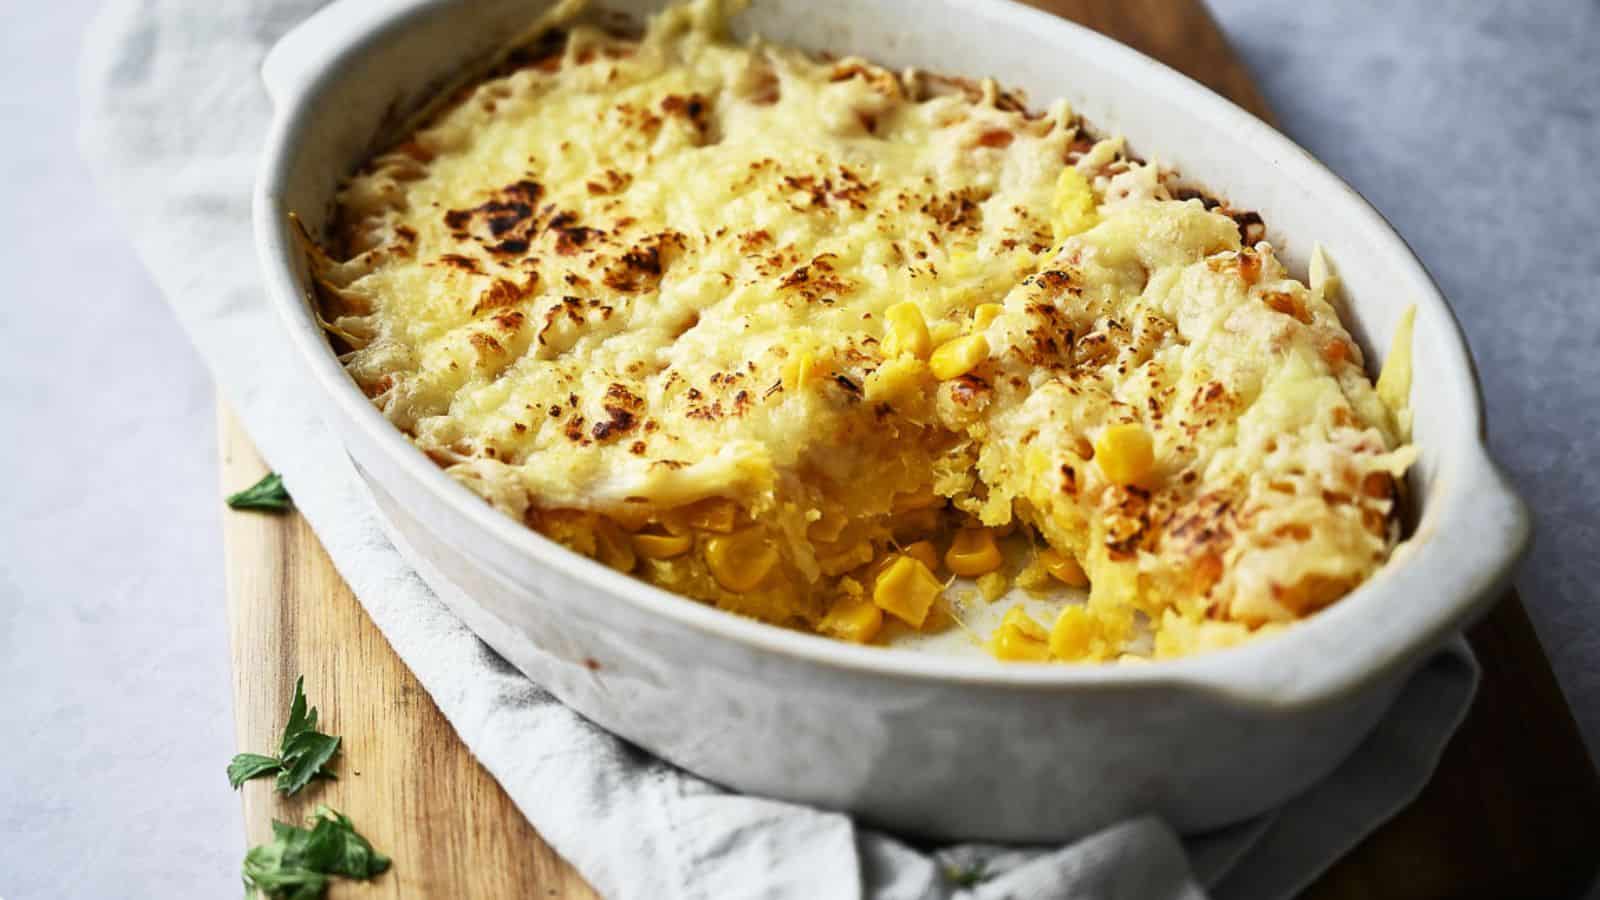 Corn casserole in a casserole dish with a portion removed.